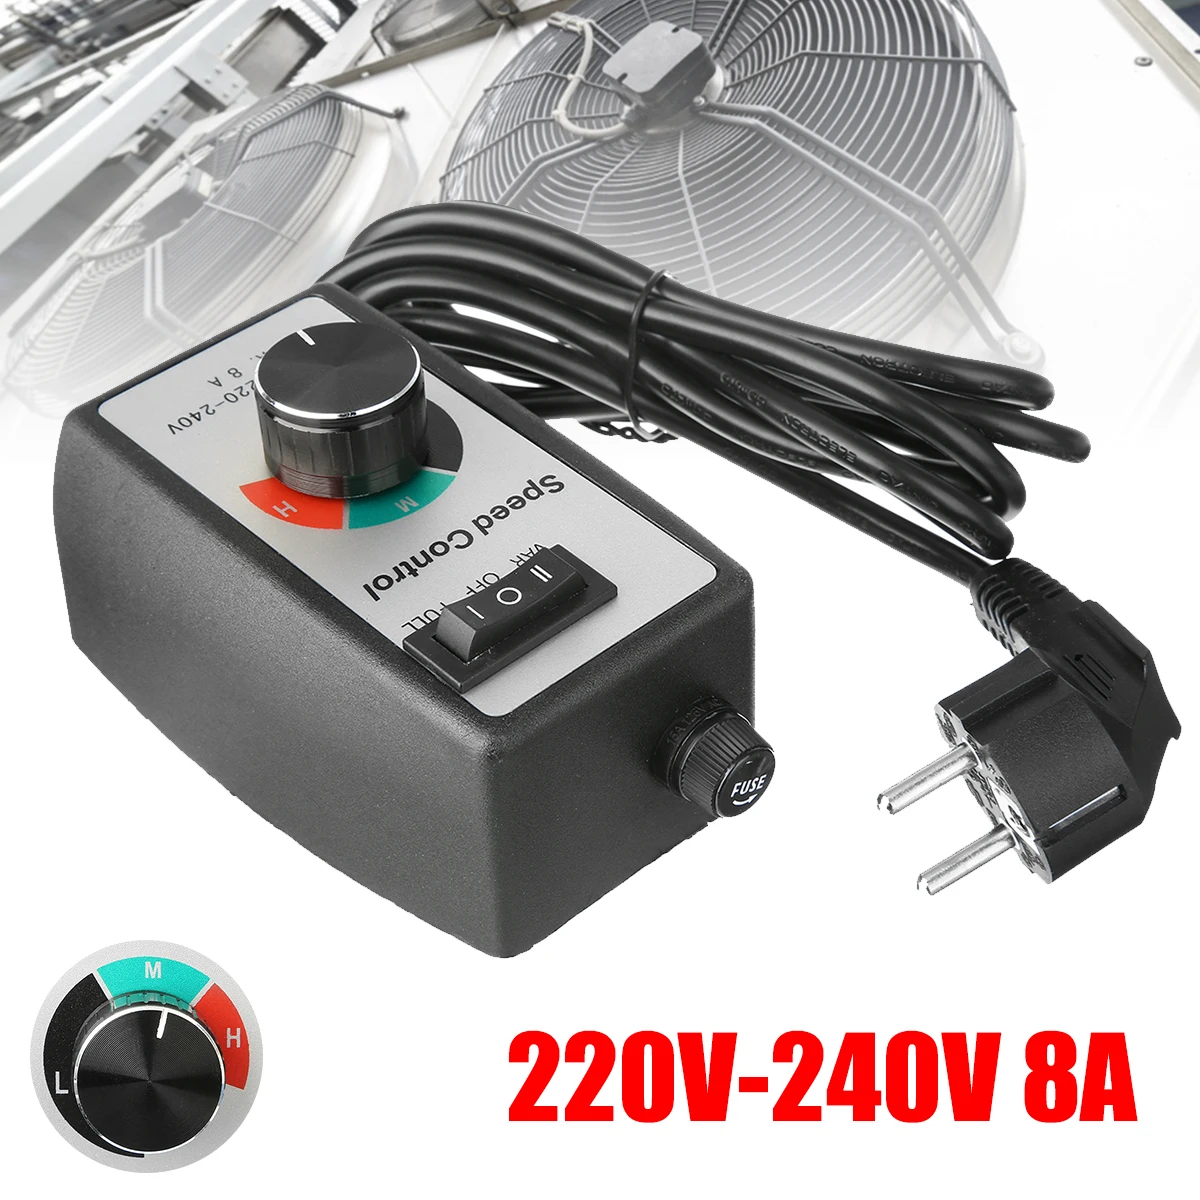 

220-240V Router Speed Control Electric Motor Rheostat Variable Speed Lighting Fans Motor Controller Power Tools EU Plug